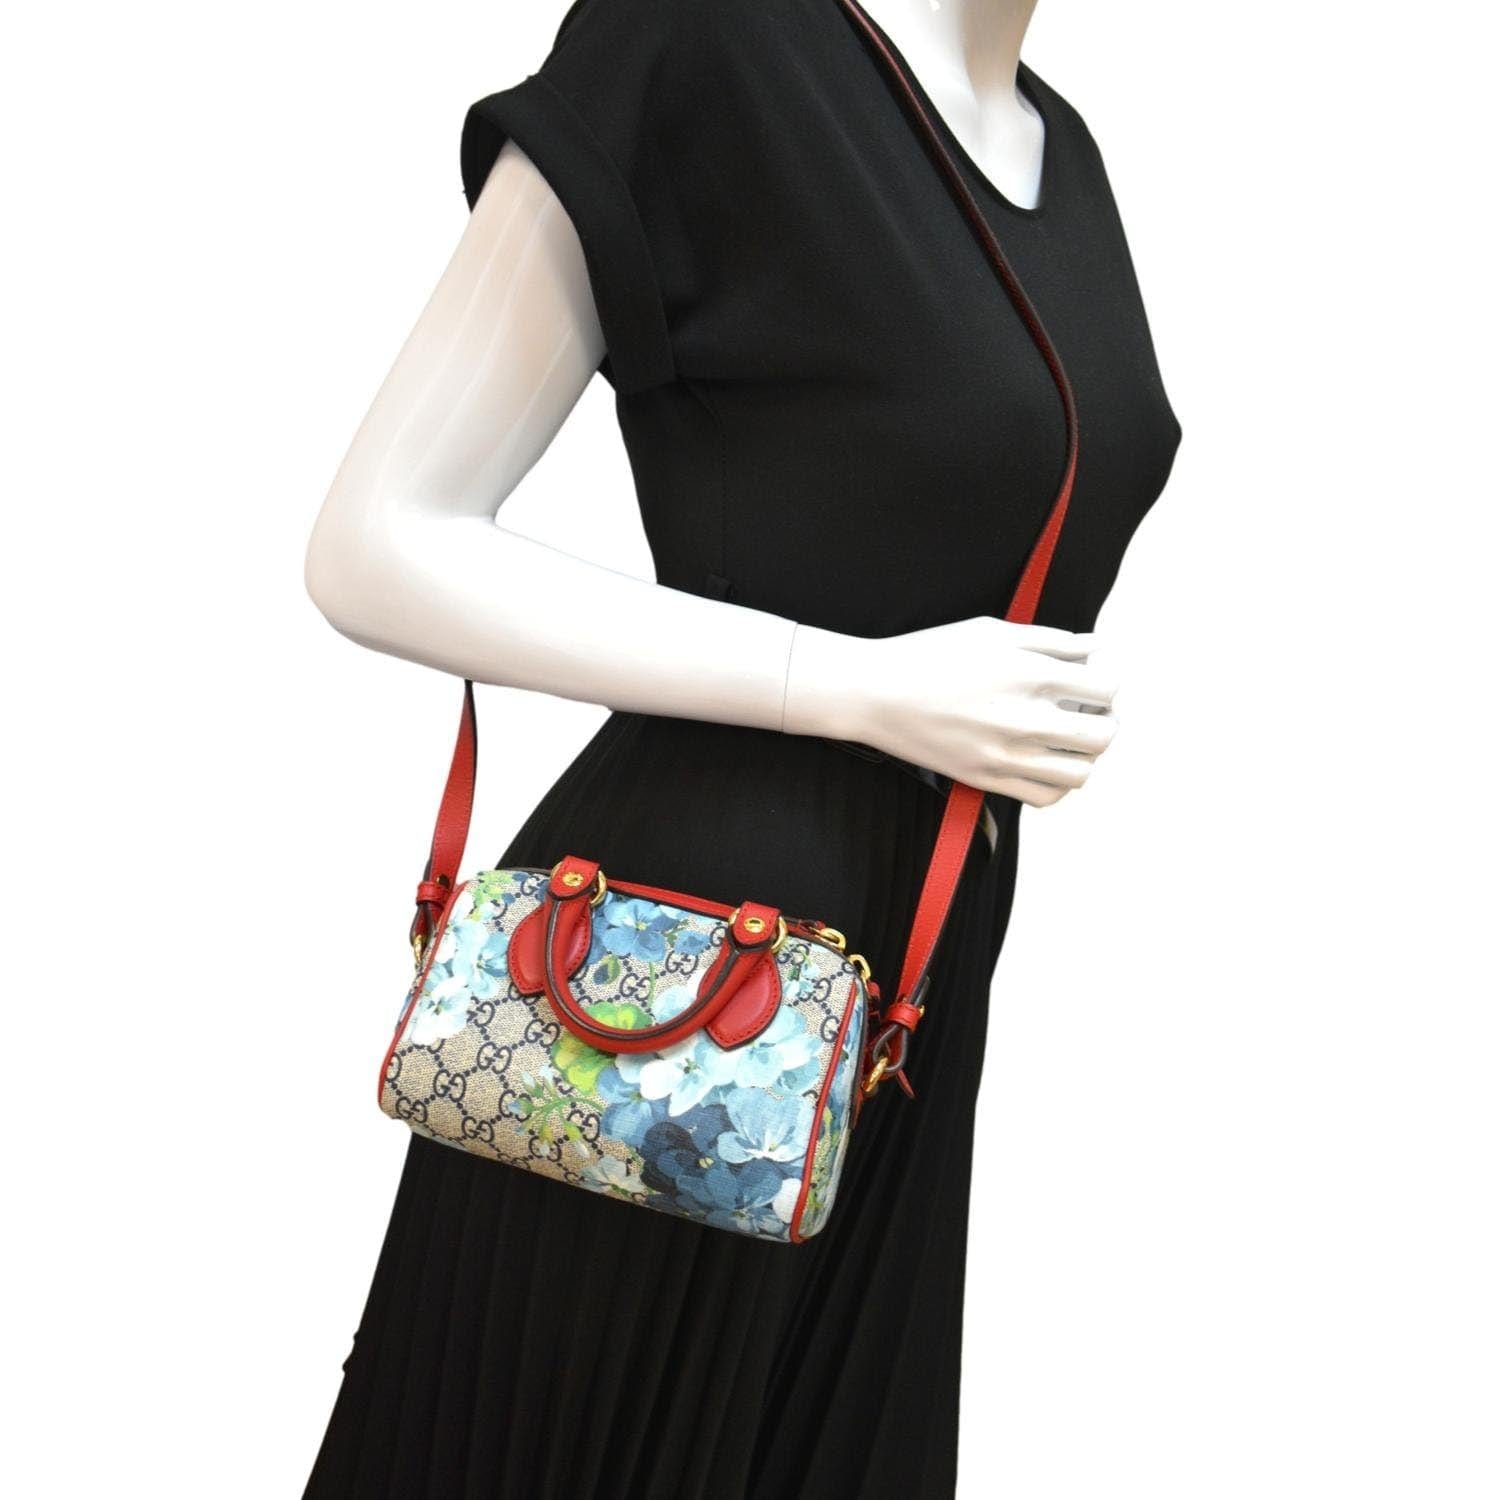 Gucci Blooms Bags & Handbags for Women, Authenticity Guaranteed